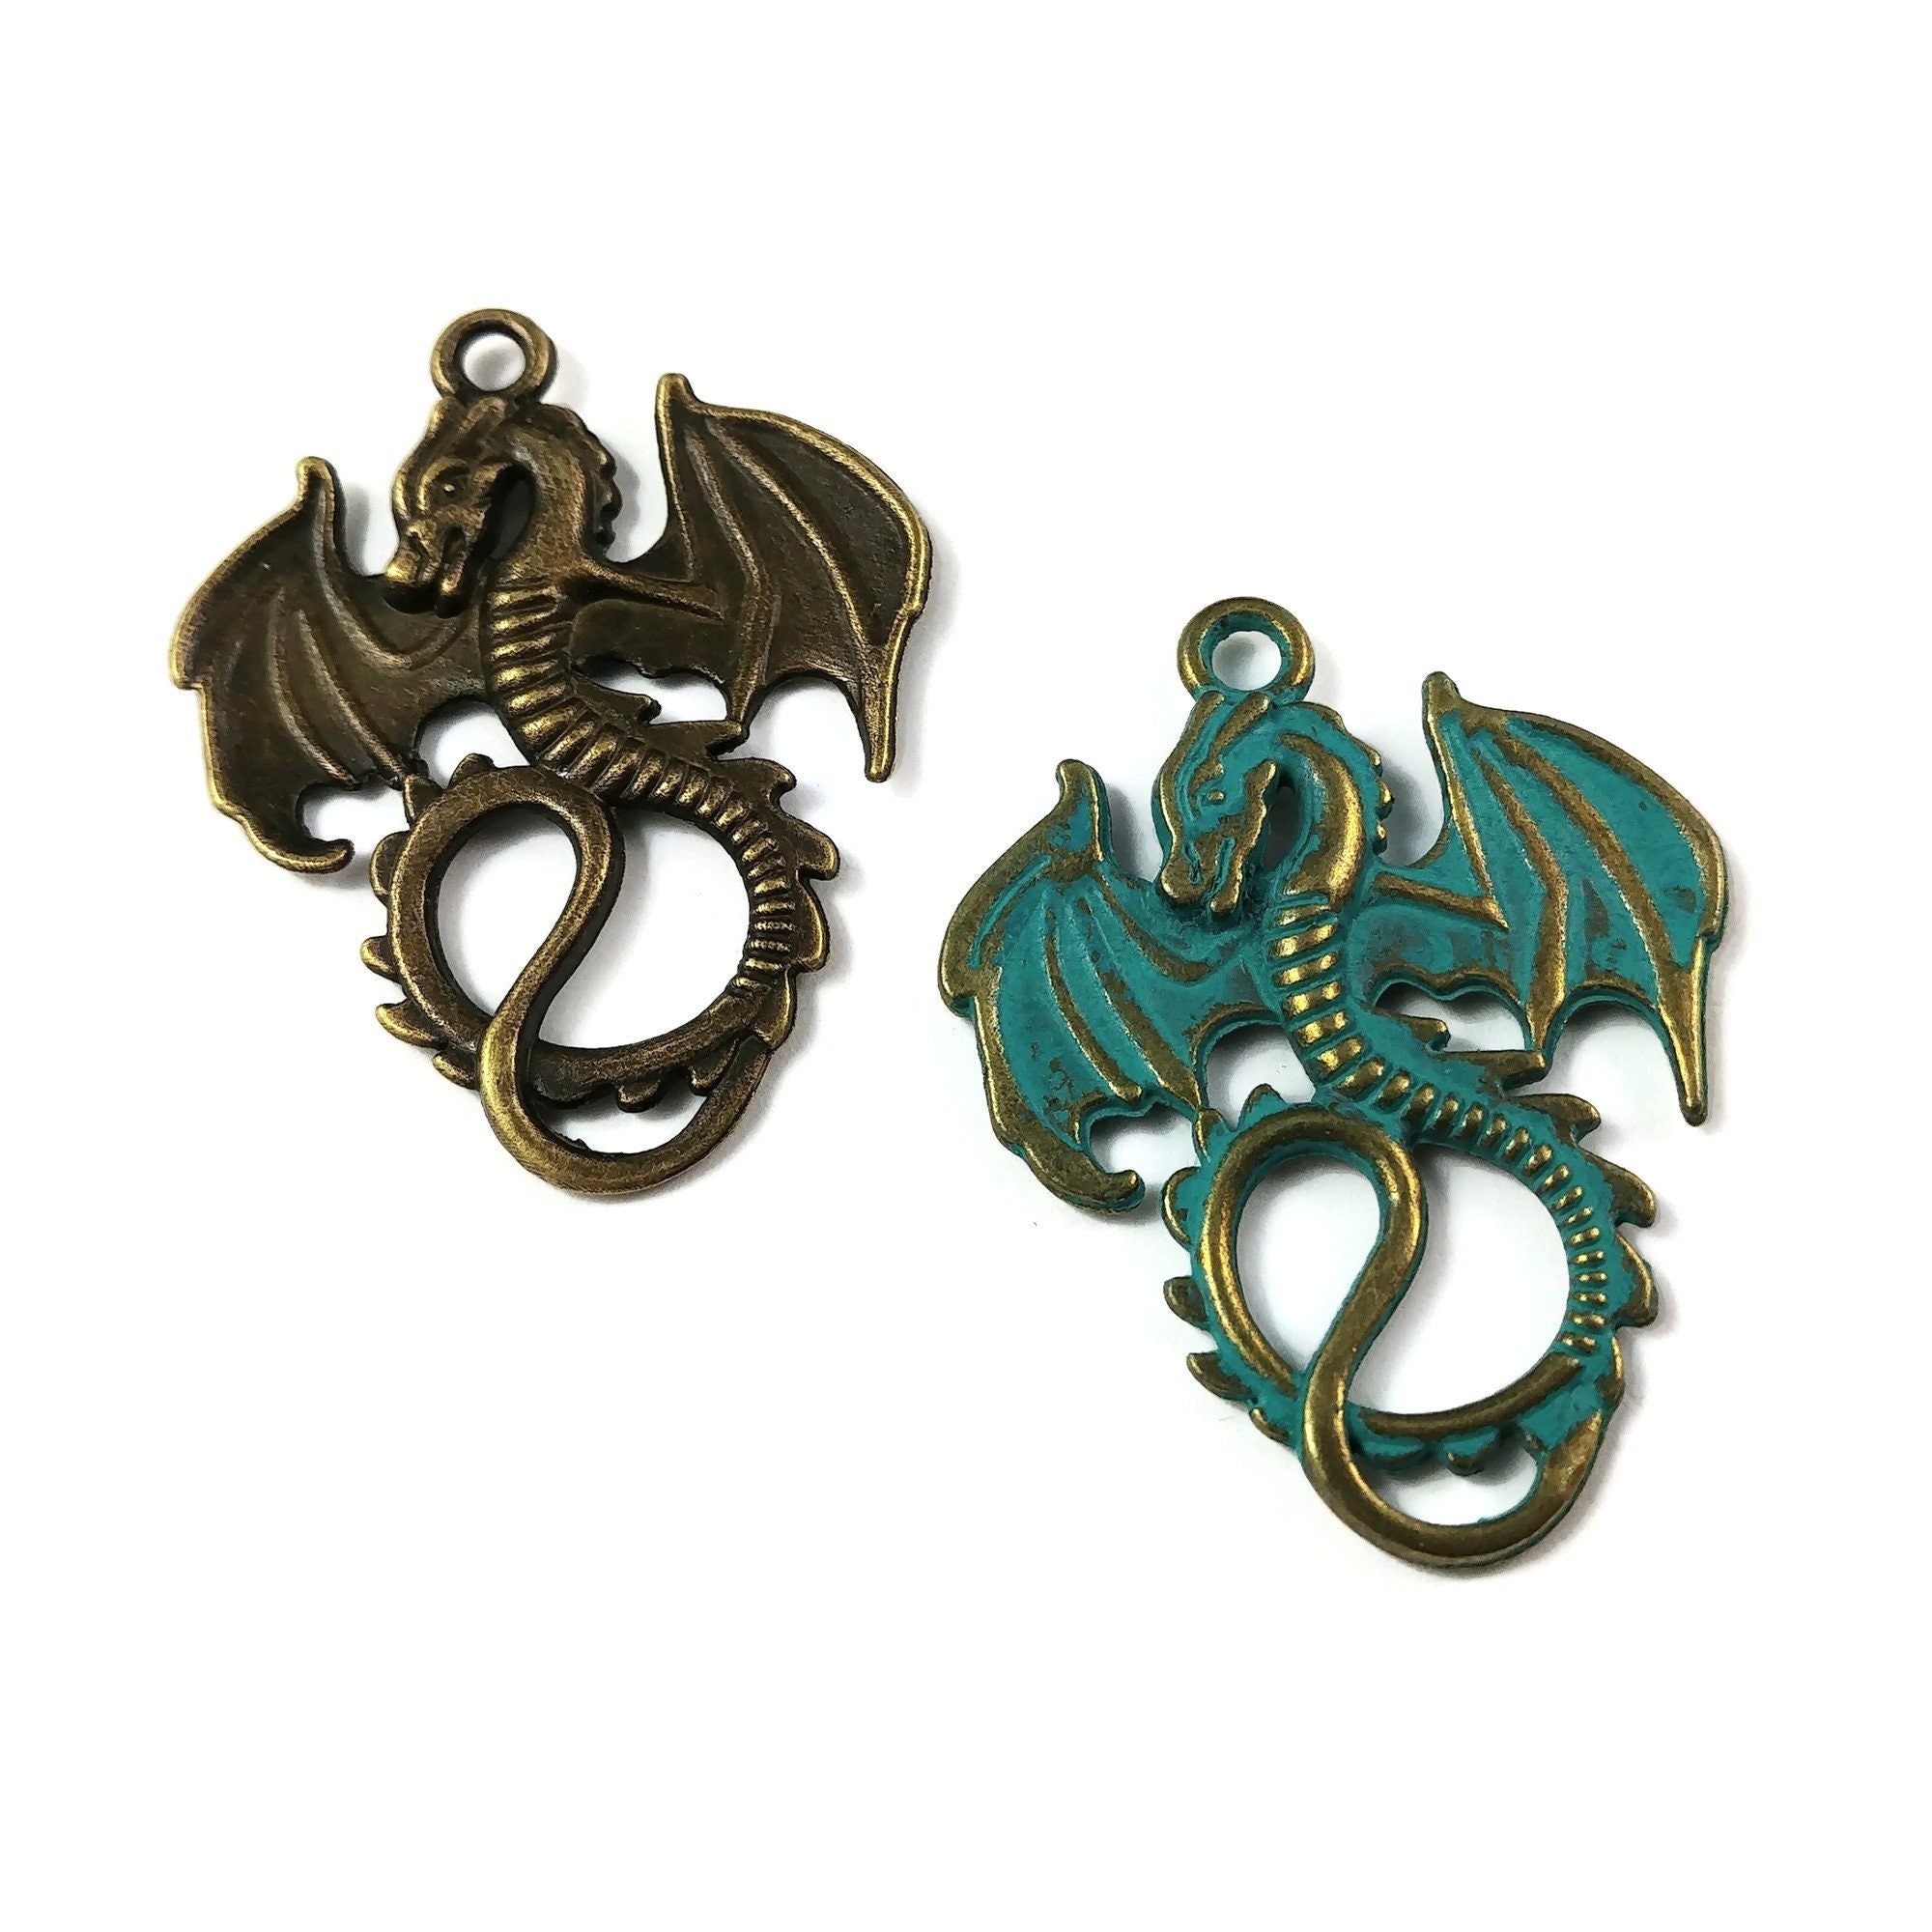 Large dragon charm, Hypoallergenic DIY necklace pendant, Fantaisy medieval pendant, patina or bronze plated charms